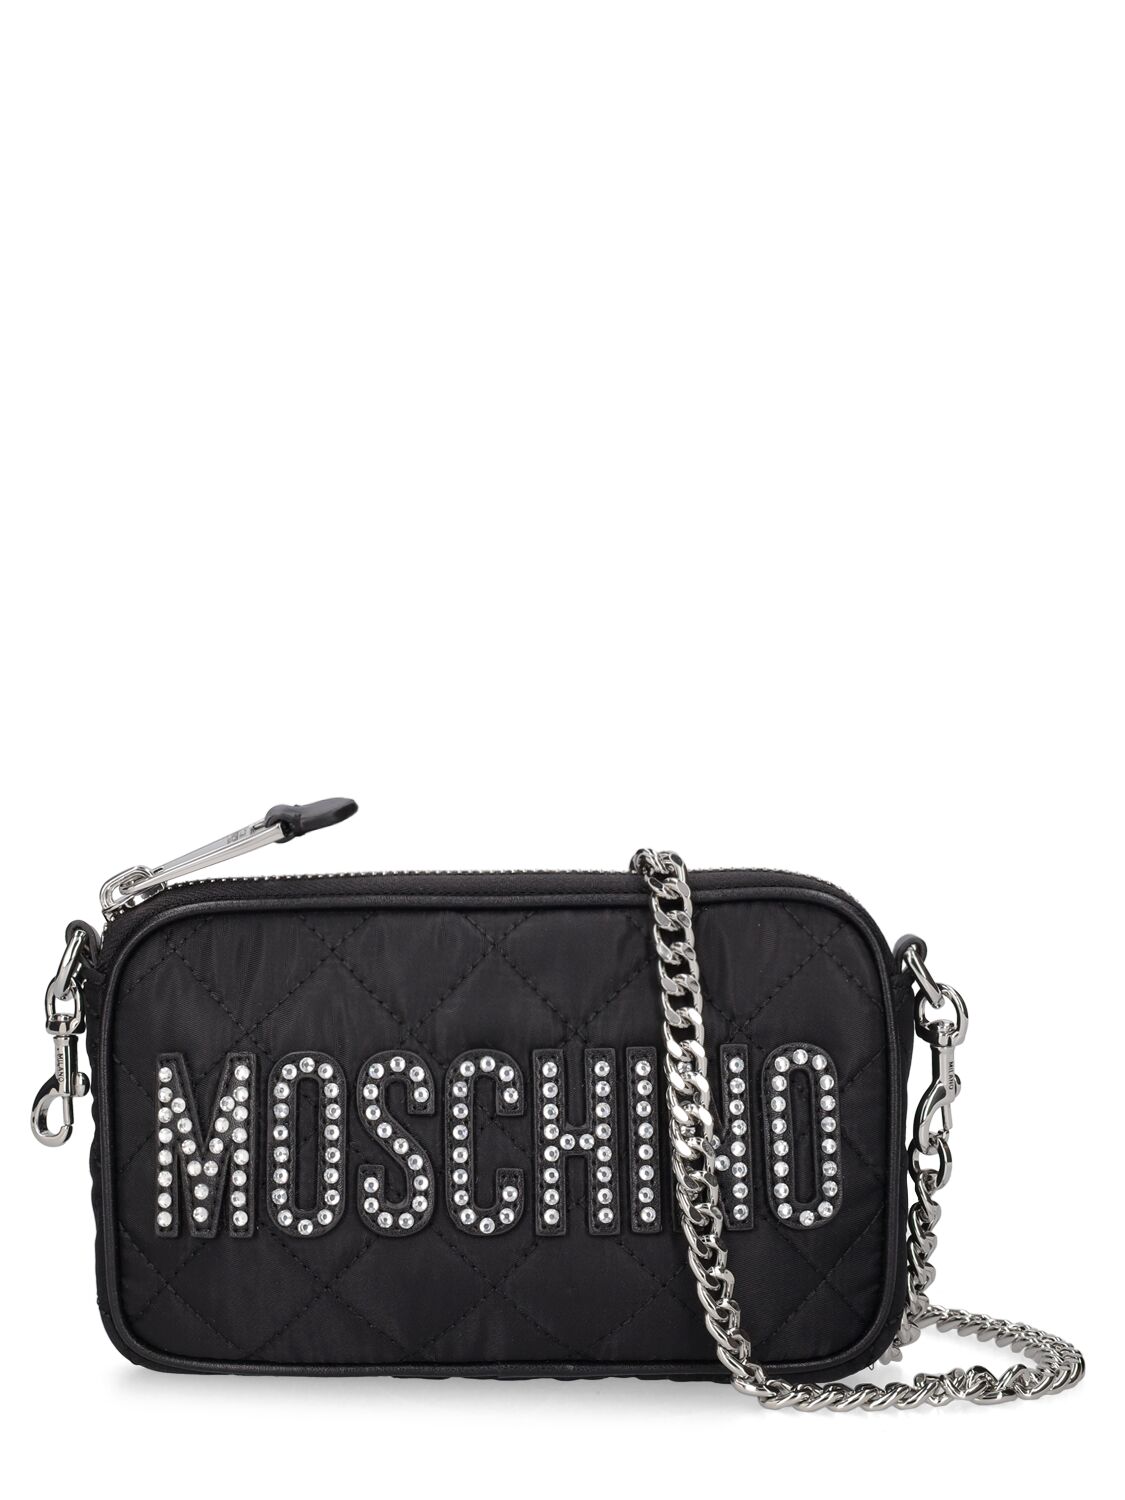 MOSCHINO CRYSTAL LOGO QUILTED NYLON SHOULDER BAG